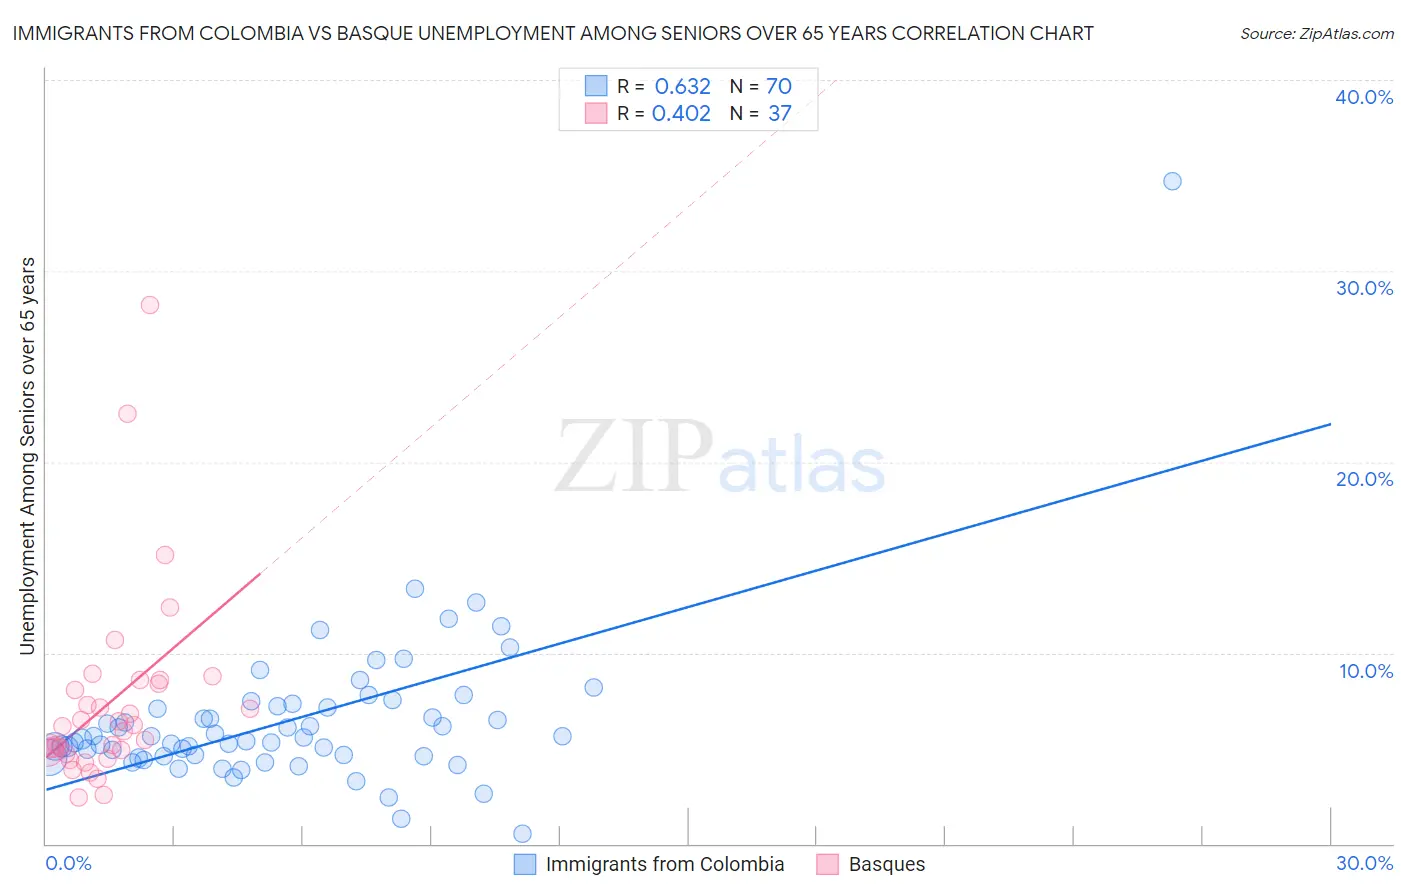 Immigrants from Colombia vs Basque Unemployment Among Seniors over 65 years